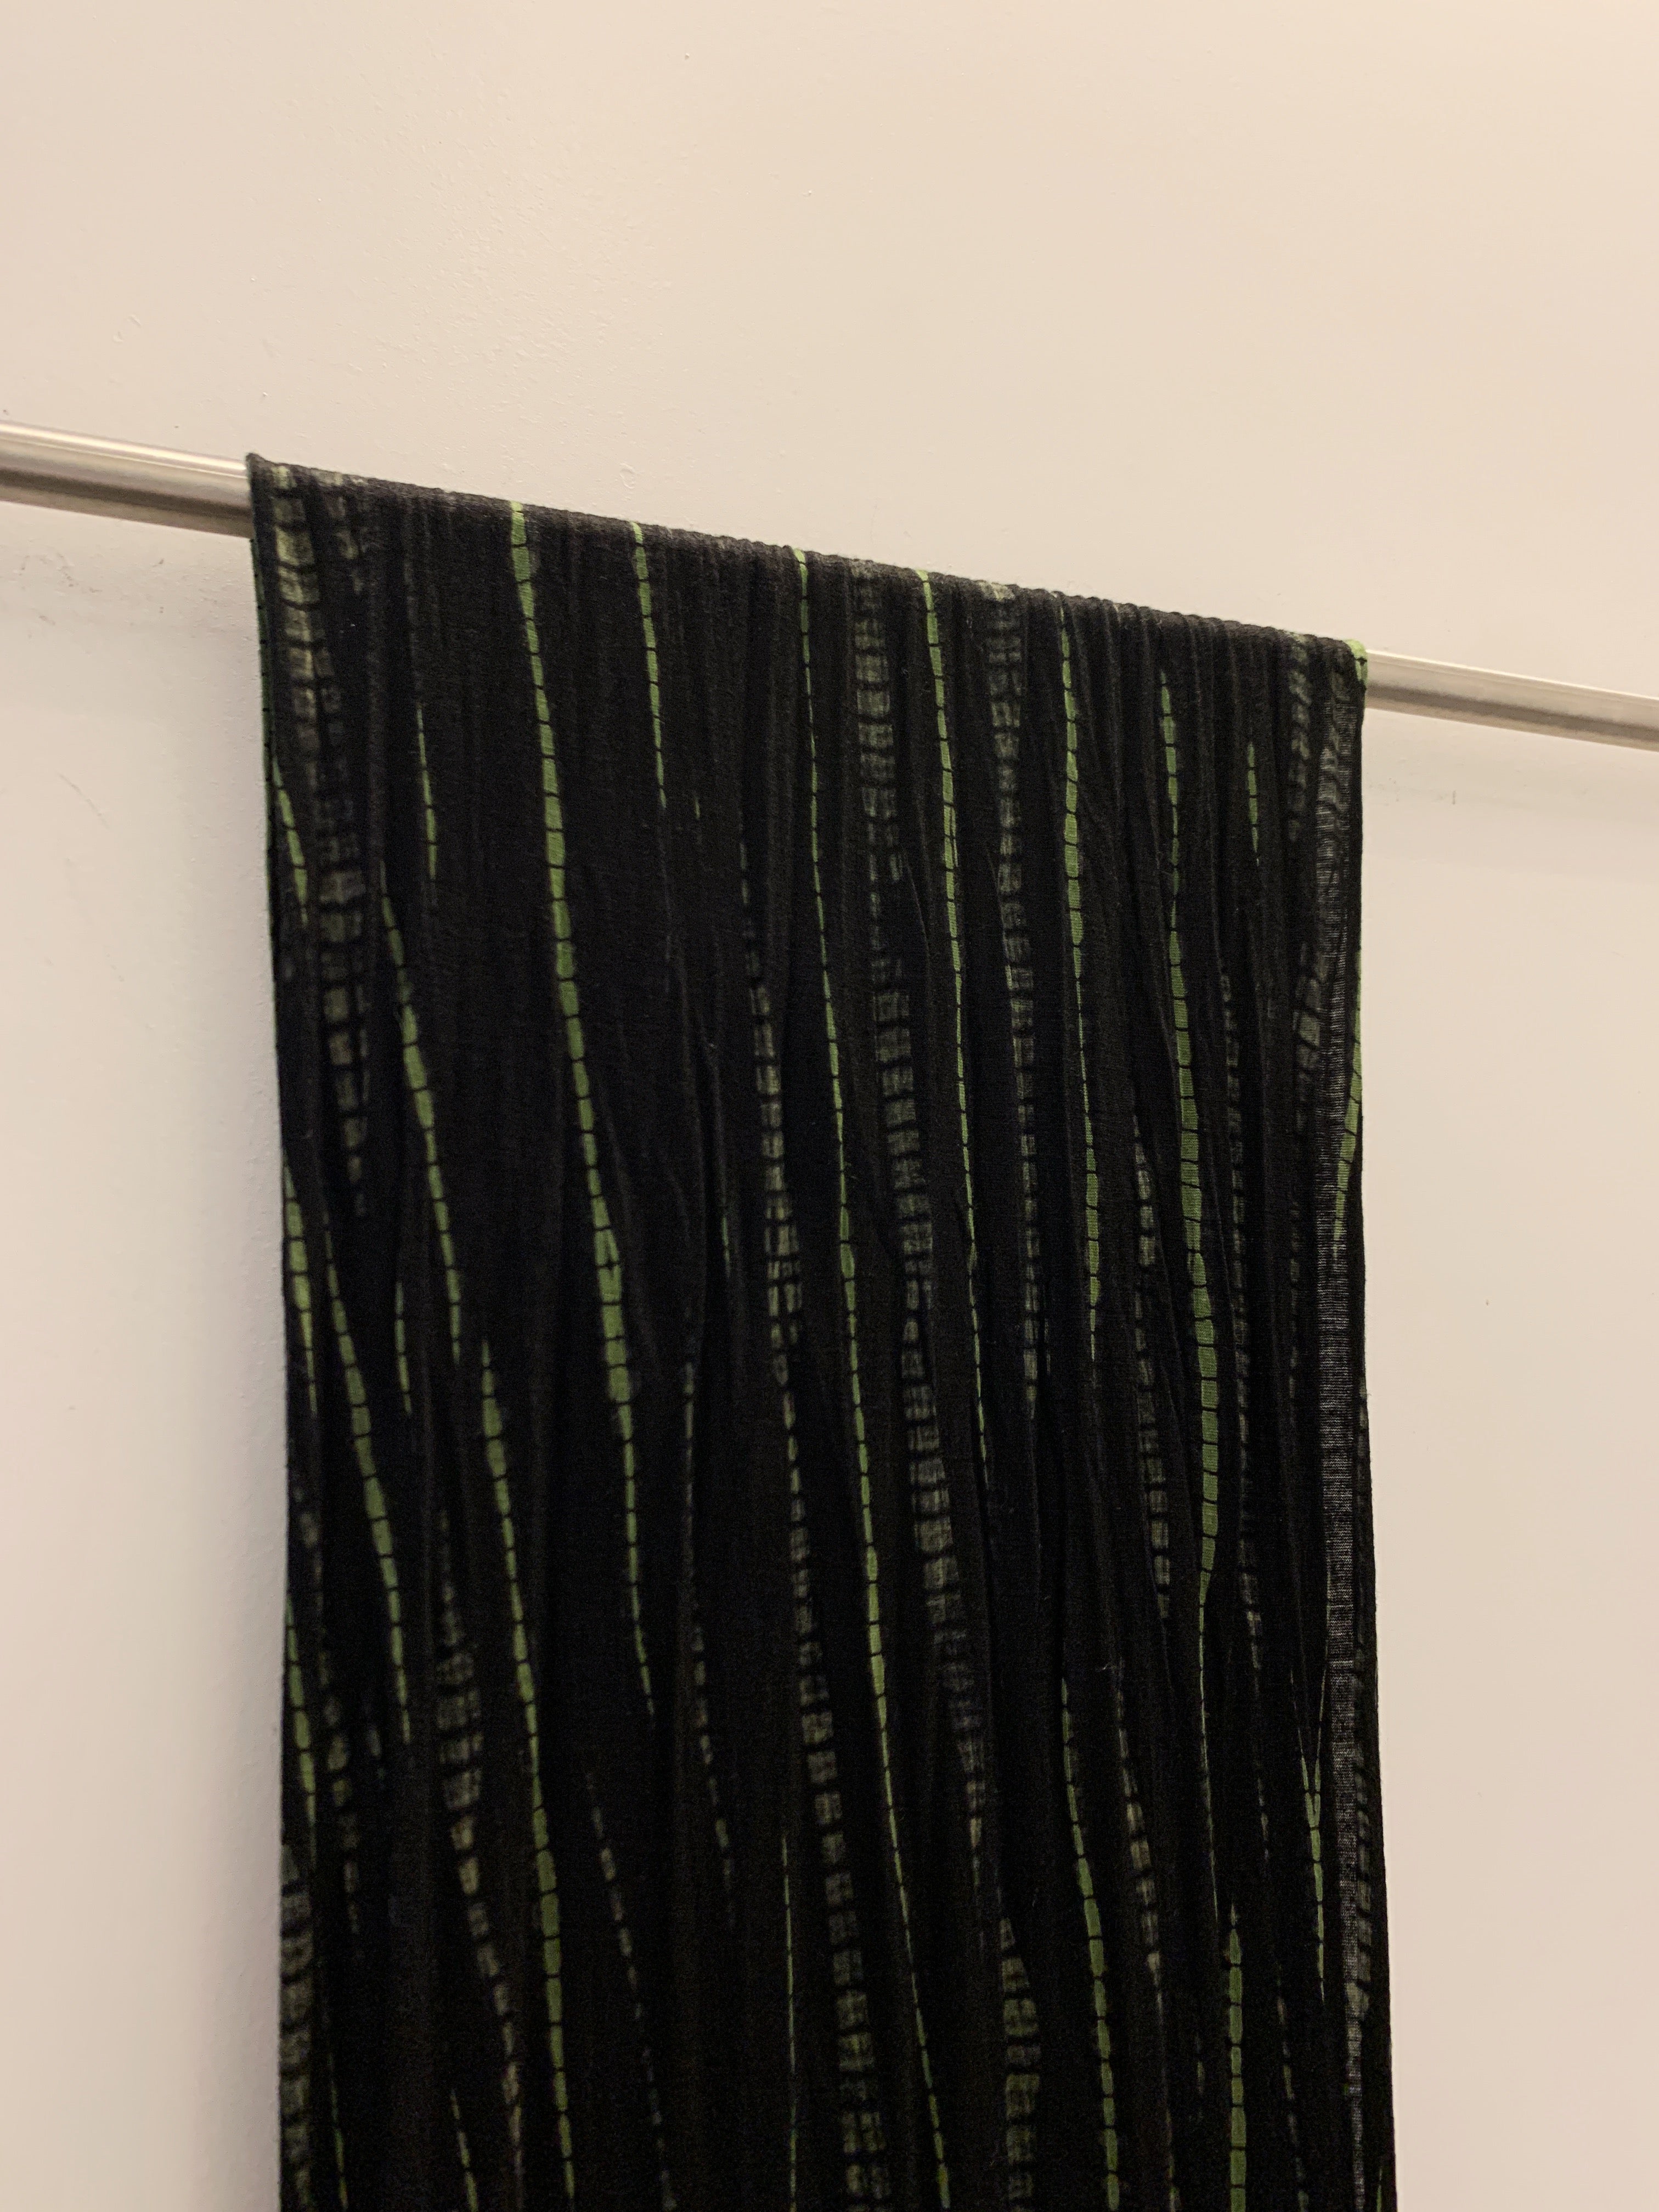 One-of-a-Kind Green and Black Tie-Dye Effect Scarf